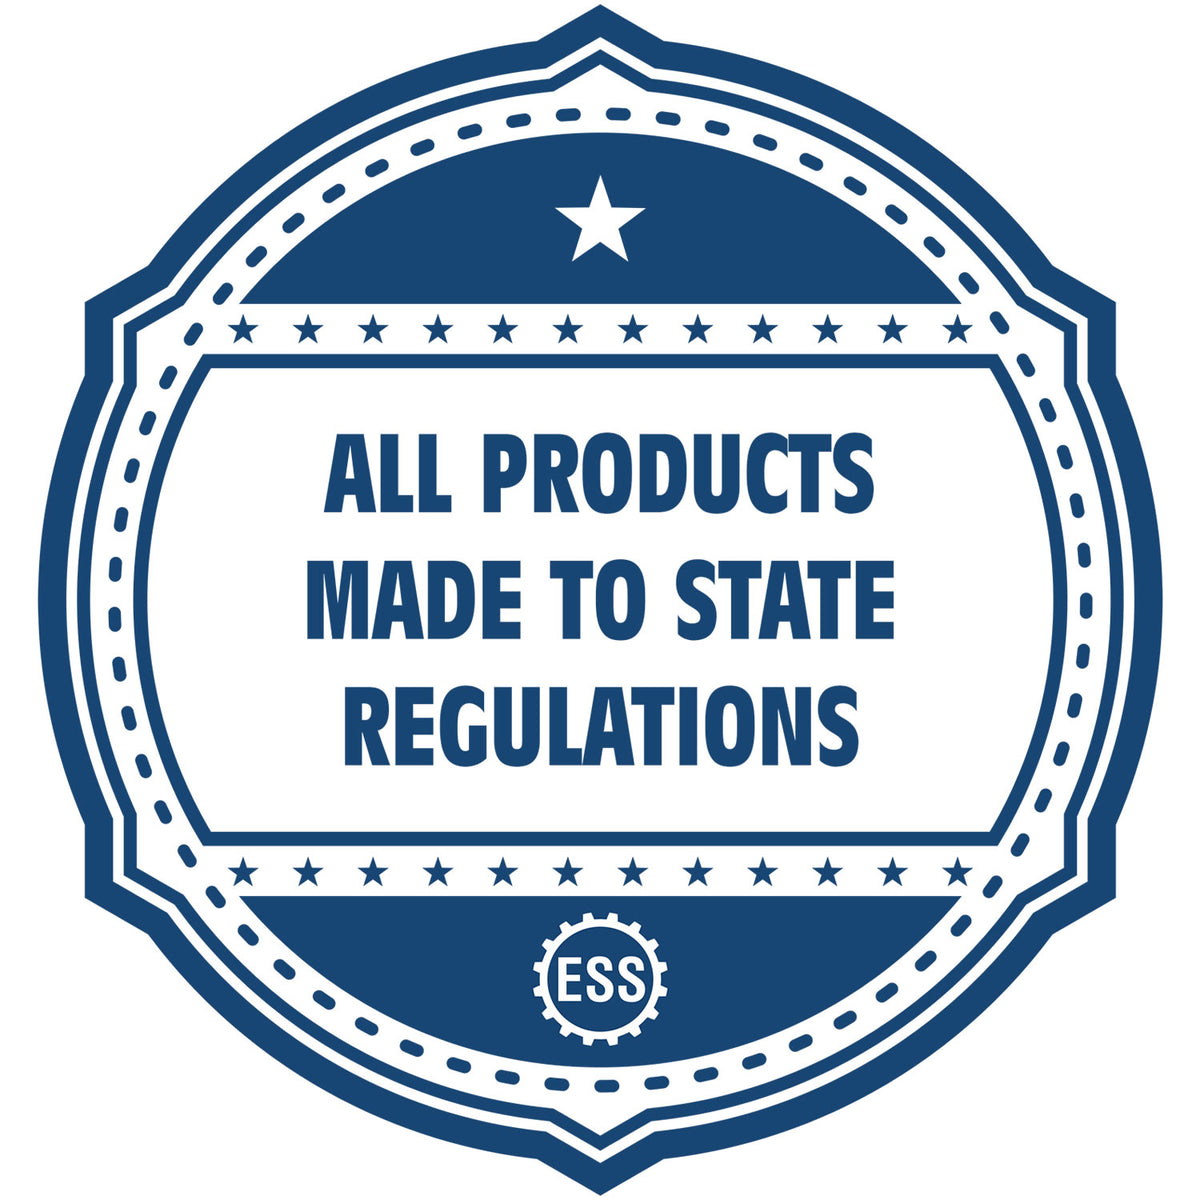 An icon or badge element for the Heavy Duty Cast Iron Kansas Engineer Seal Embosser showing that this product is made in compliance with state regulations.